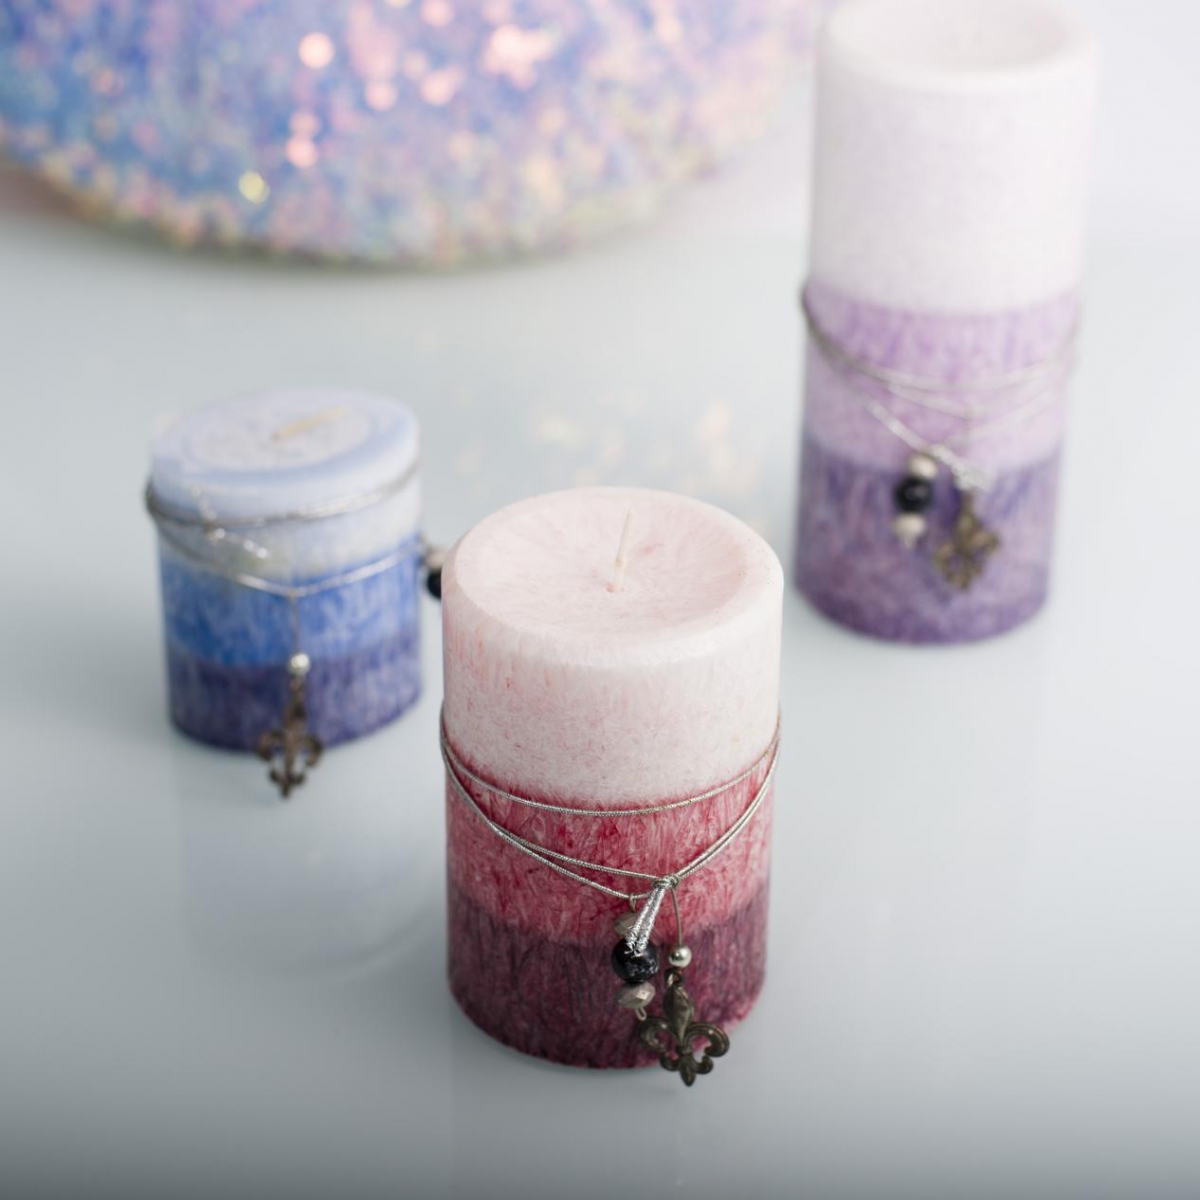 Pillar Candles：Multi Color ,Three Layer Purple, Rainbow Candle, Centerpiece, China Factory,Price-HOWCANDLE-Candles,Scented Candles,Aromatherapy Candles,Soy Candles,Vegan Candles,Jar Candles,Pillar Candles,Candle Gift Sets,Essential Oils,Reed Diffuser,Candle Holder,